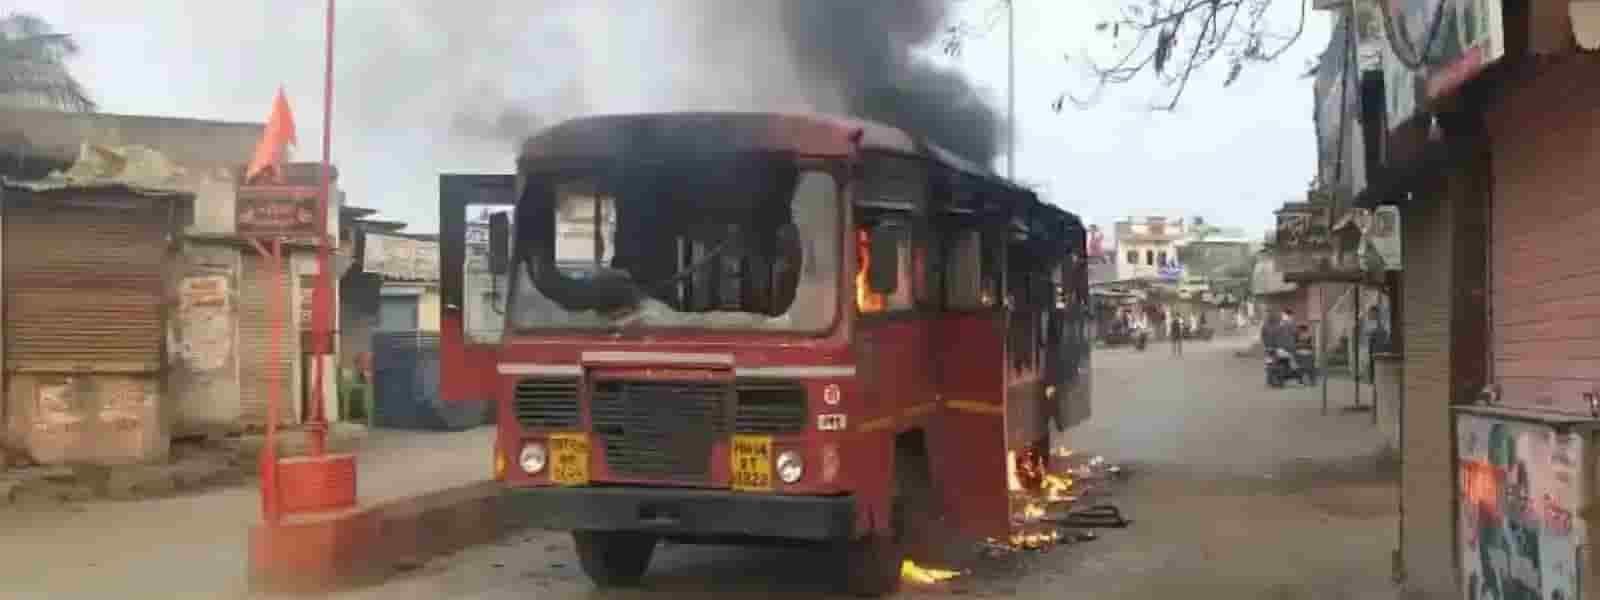 Maratha quota agitation: Curfew imposed in Jalna's Ambad taluka to ensure peace, law and order